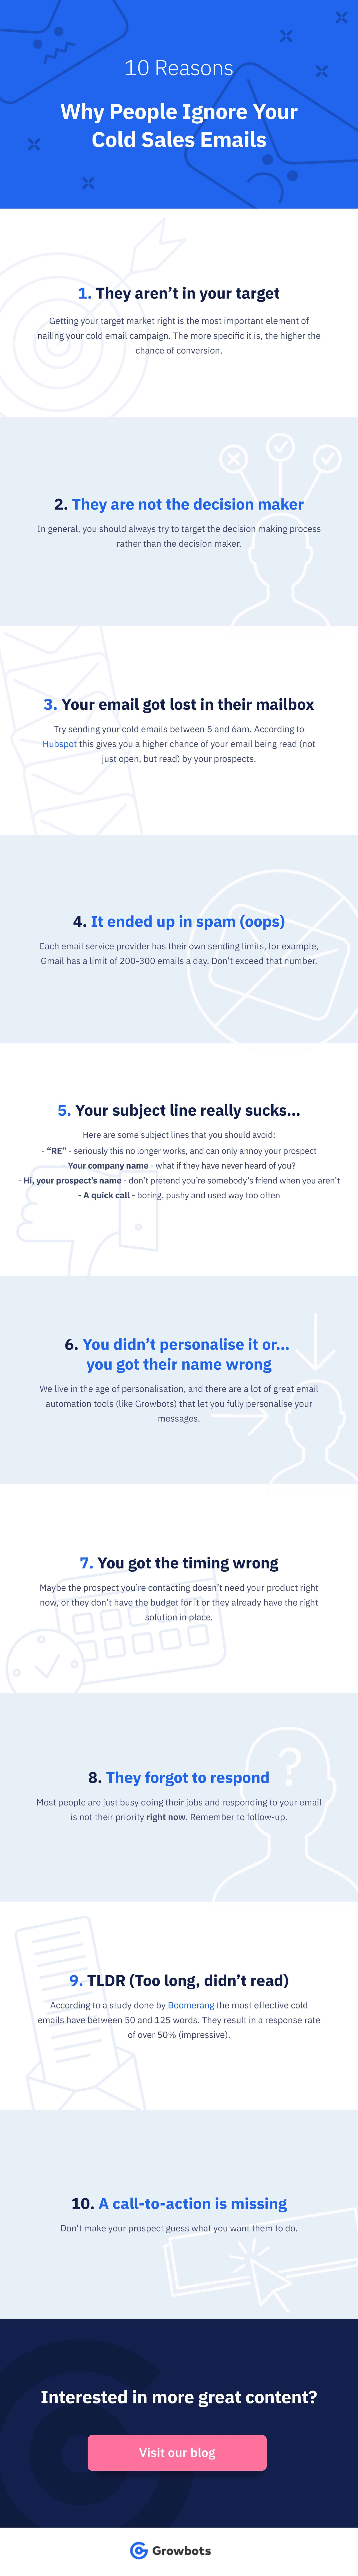 10 Reasons Why People Ignore your Cold Sales Emails